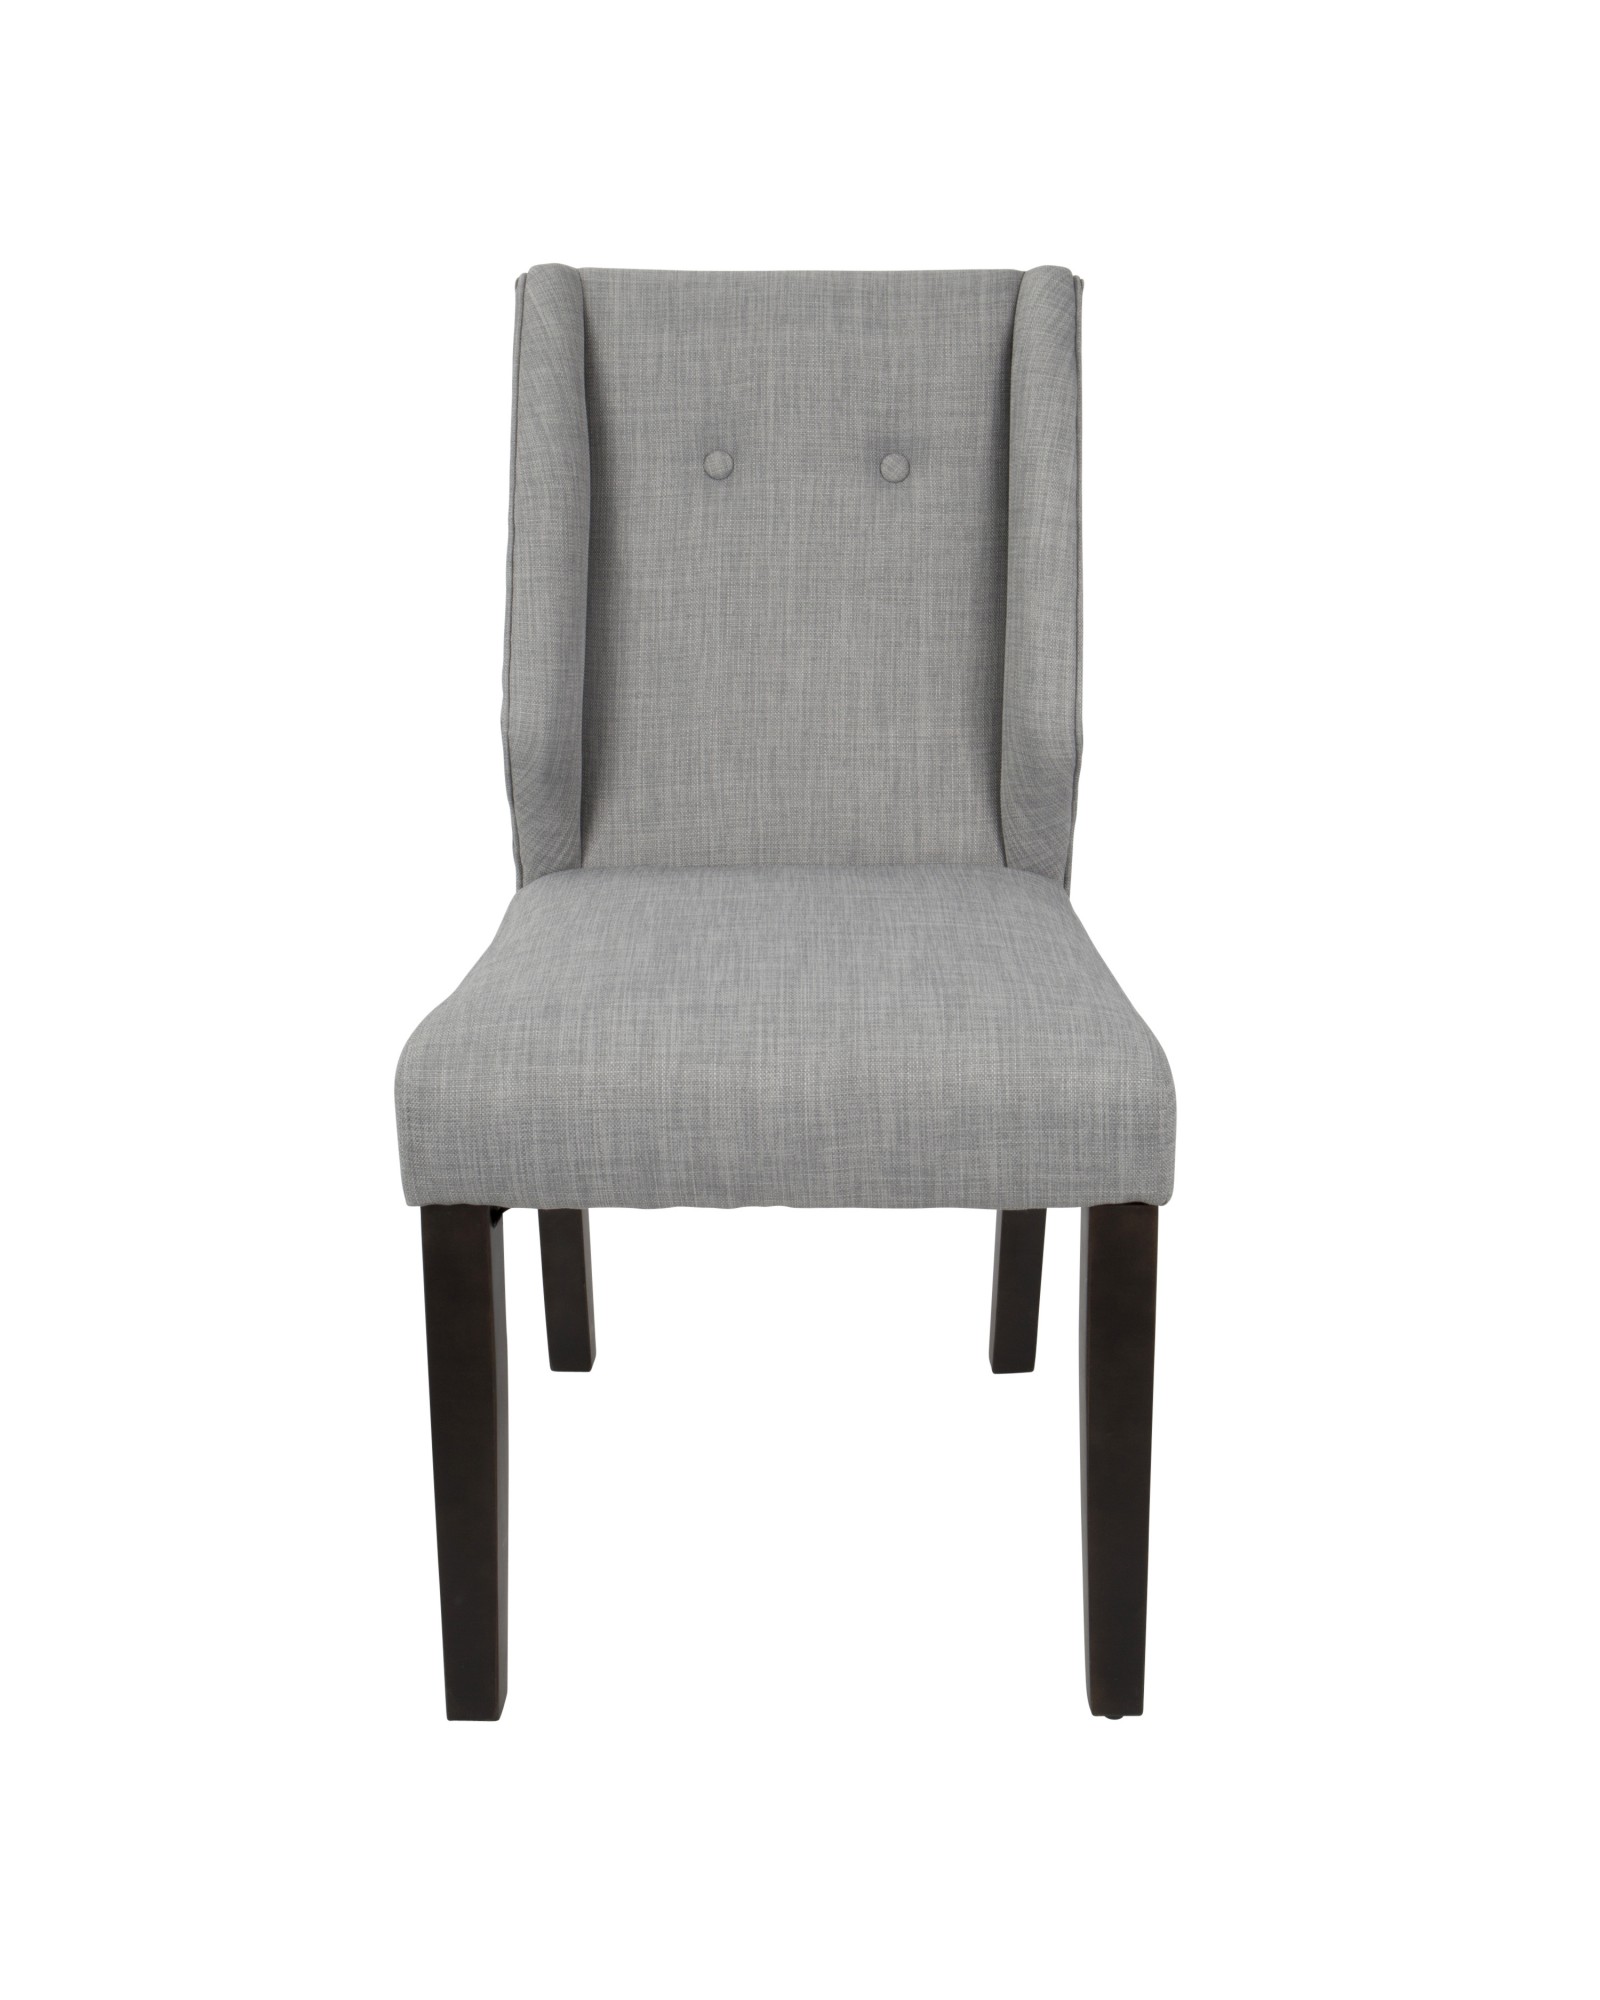 Rosario Contemporary Dining Chair in Walnut and Light Grey - Set of 2